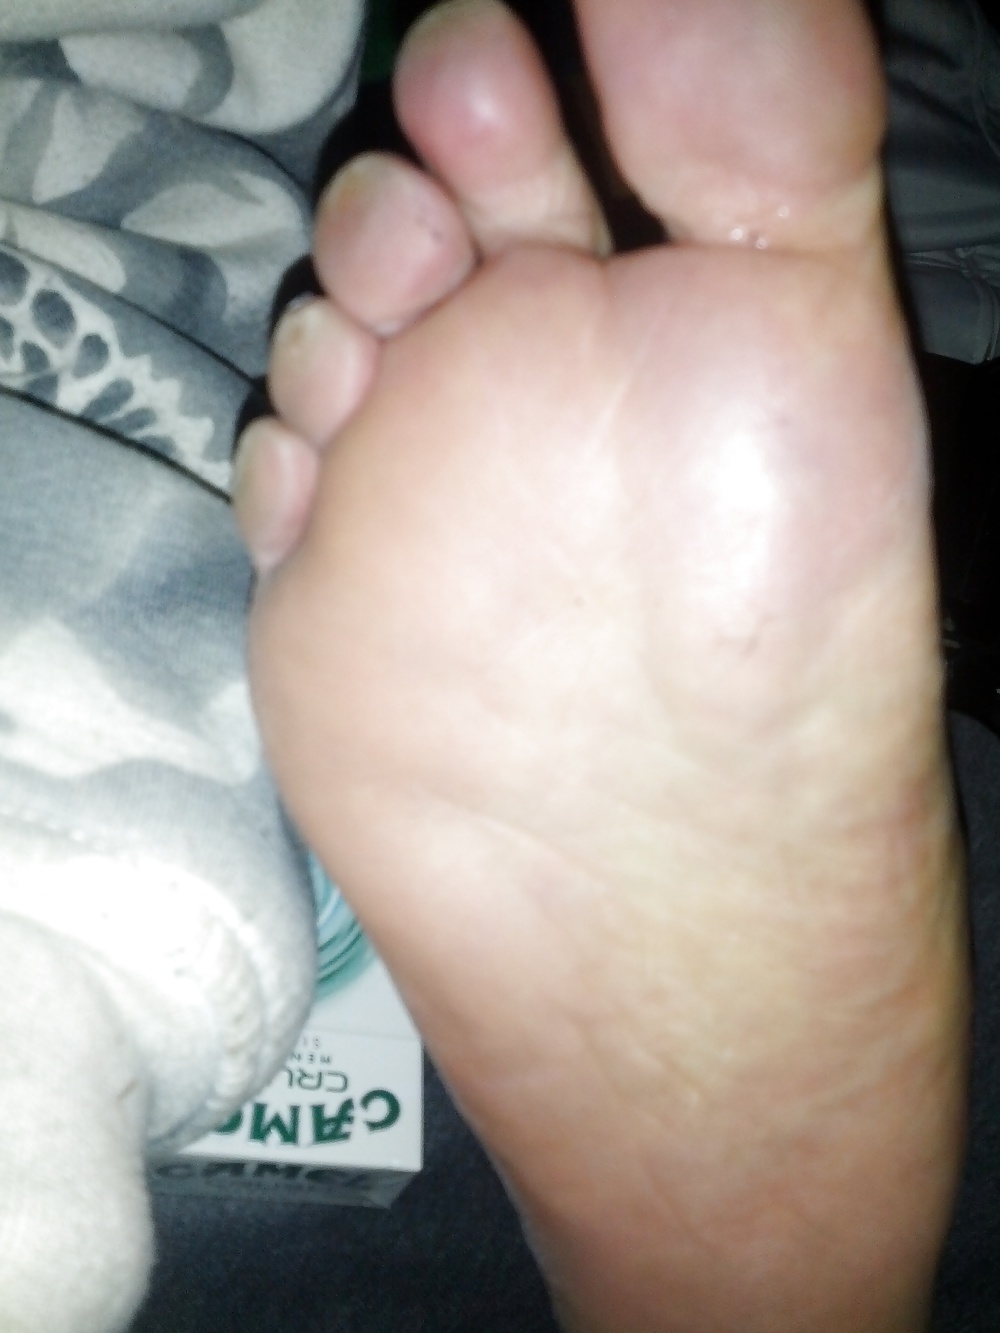 my moms friends feet and tits porn pictures